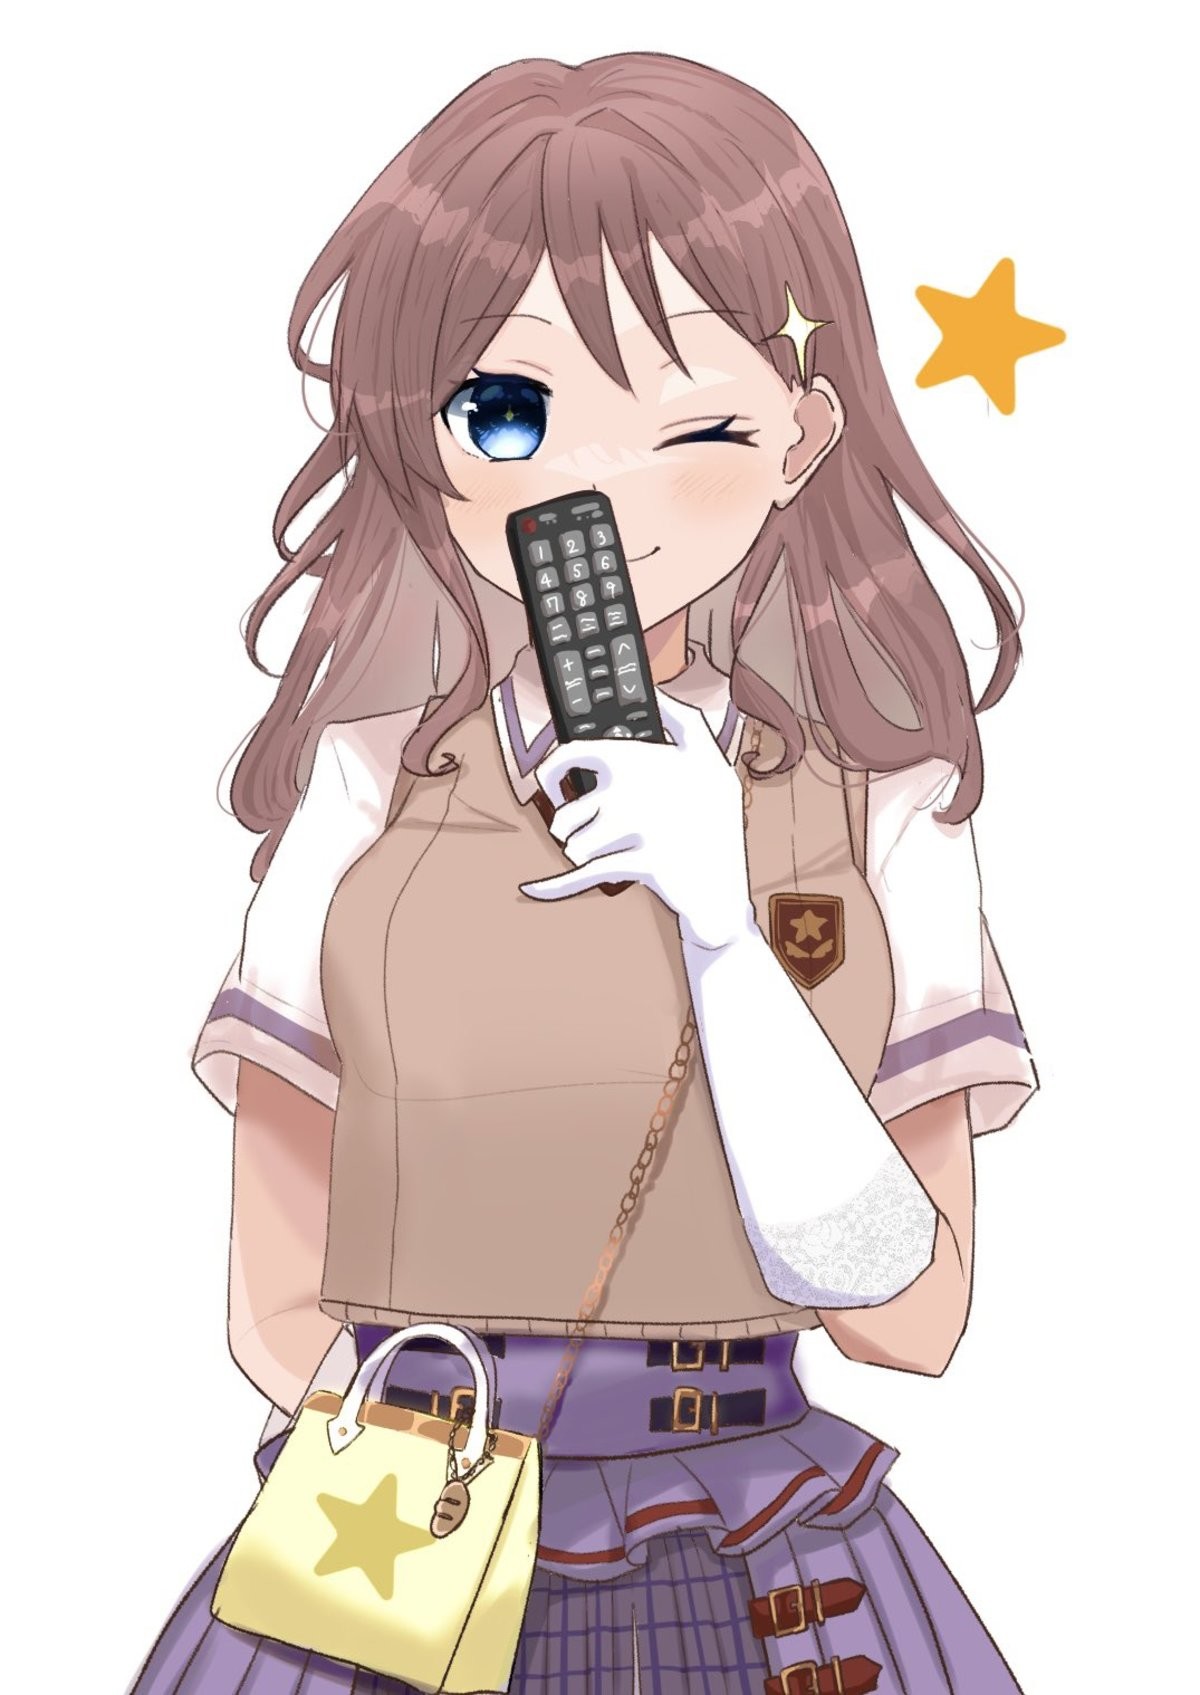 Daily BanG Dream #654. Artist's Twitter post: Girl is from BanG Dream Outfit is Shokuhou Misaki's from Railgun join list: BanGDream (95 subs)Mention History &qu